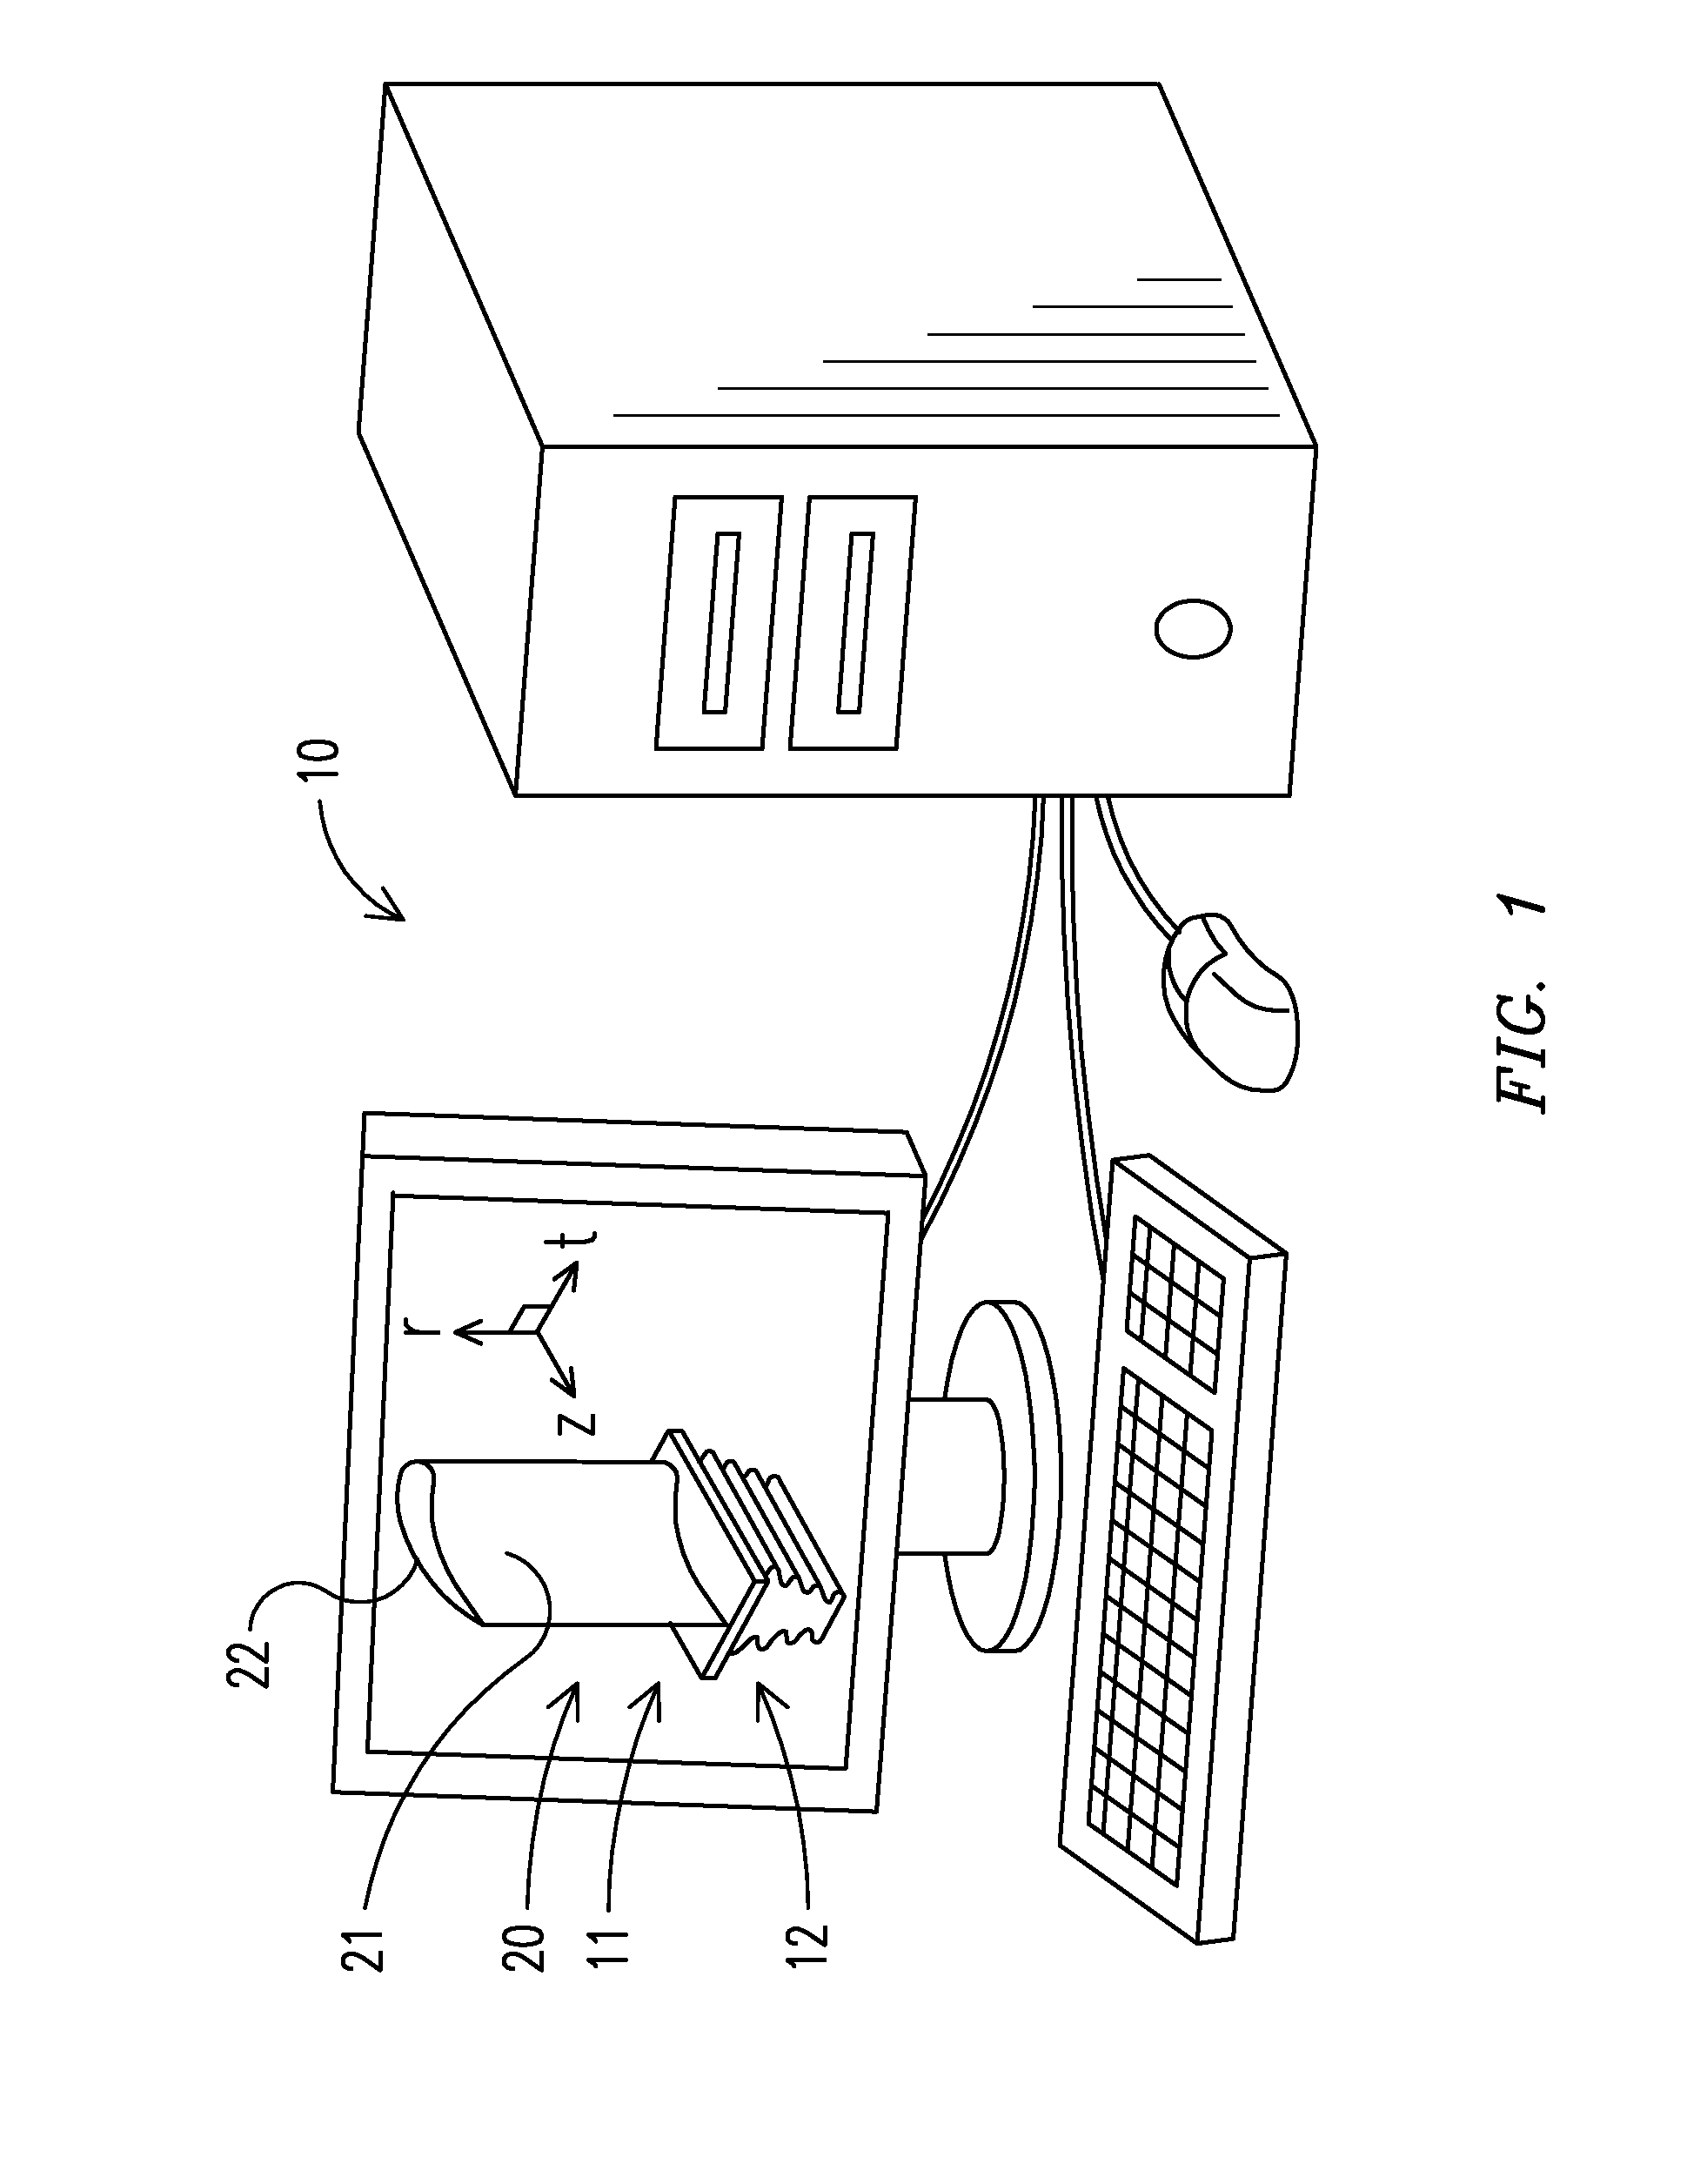 Process for Manufacturing a Component